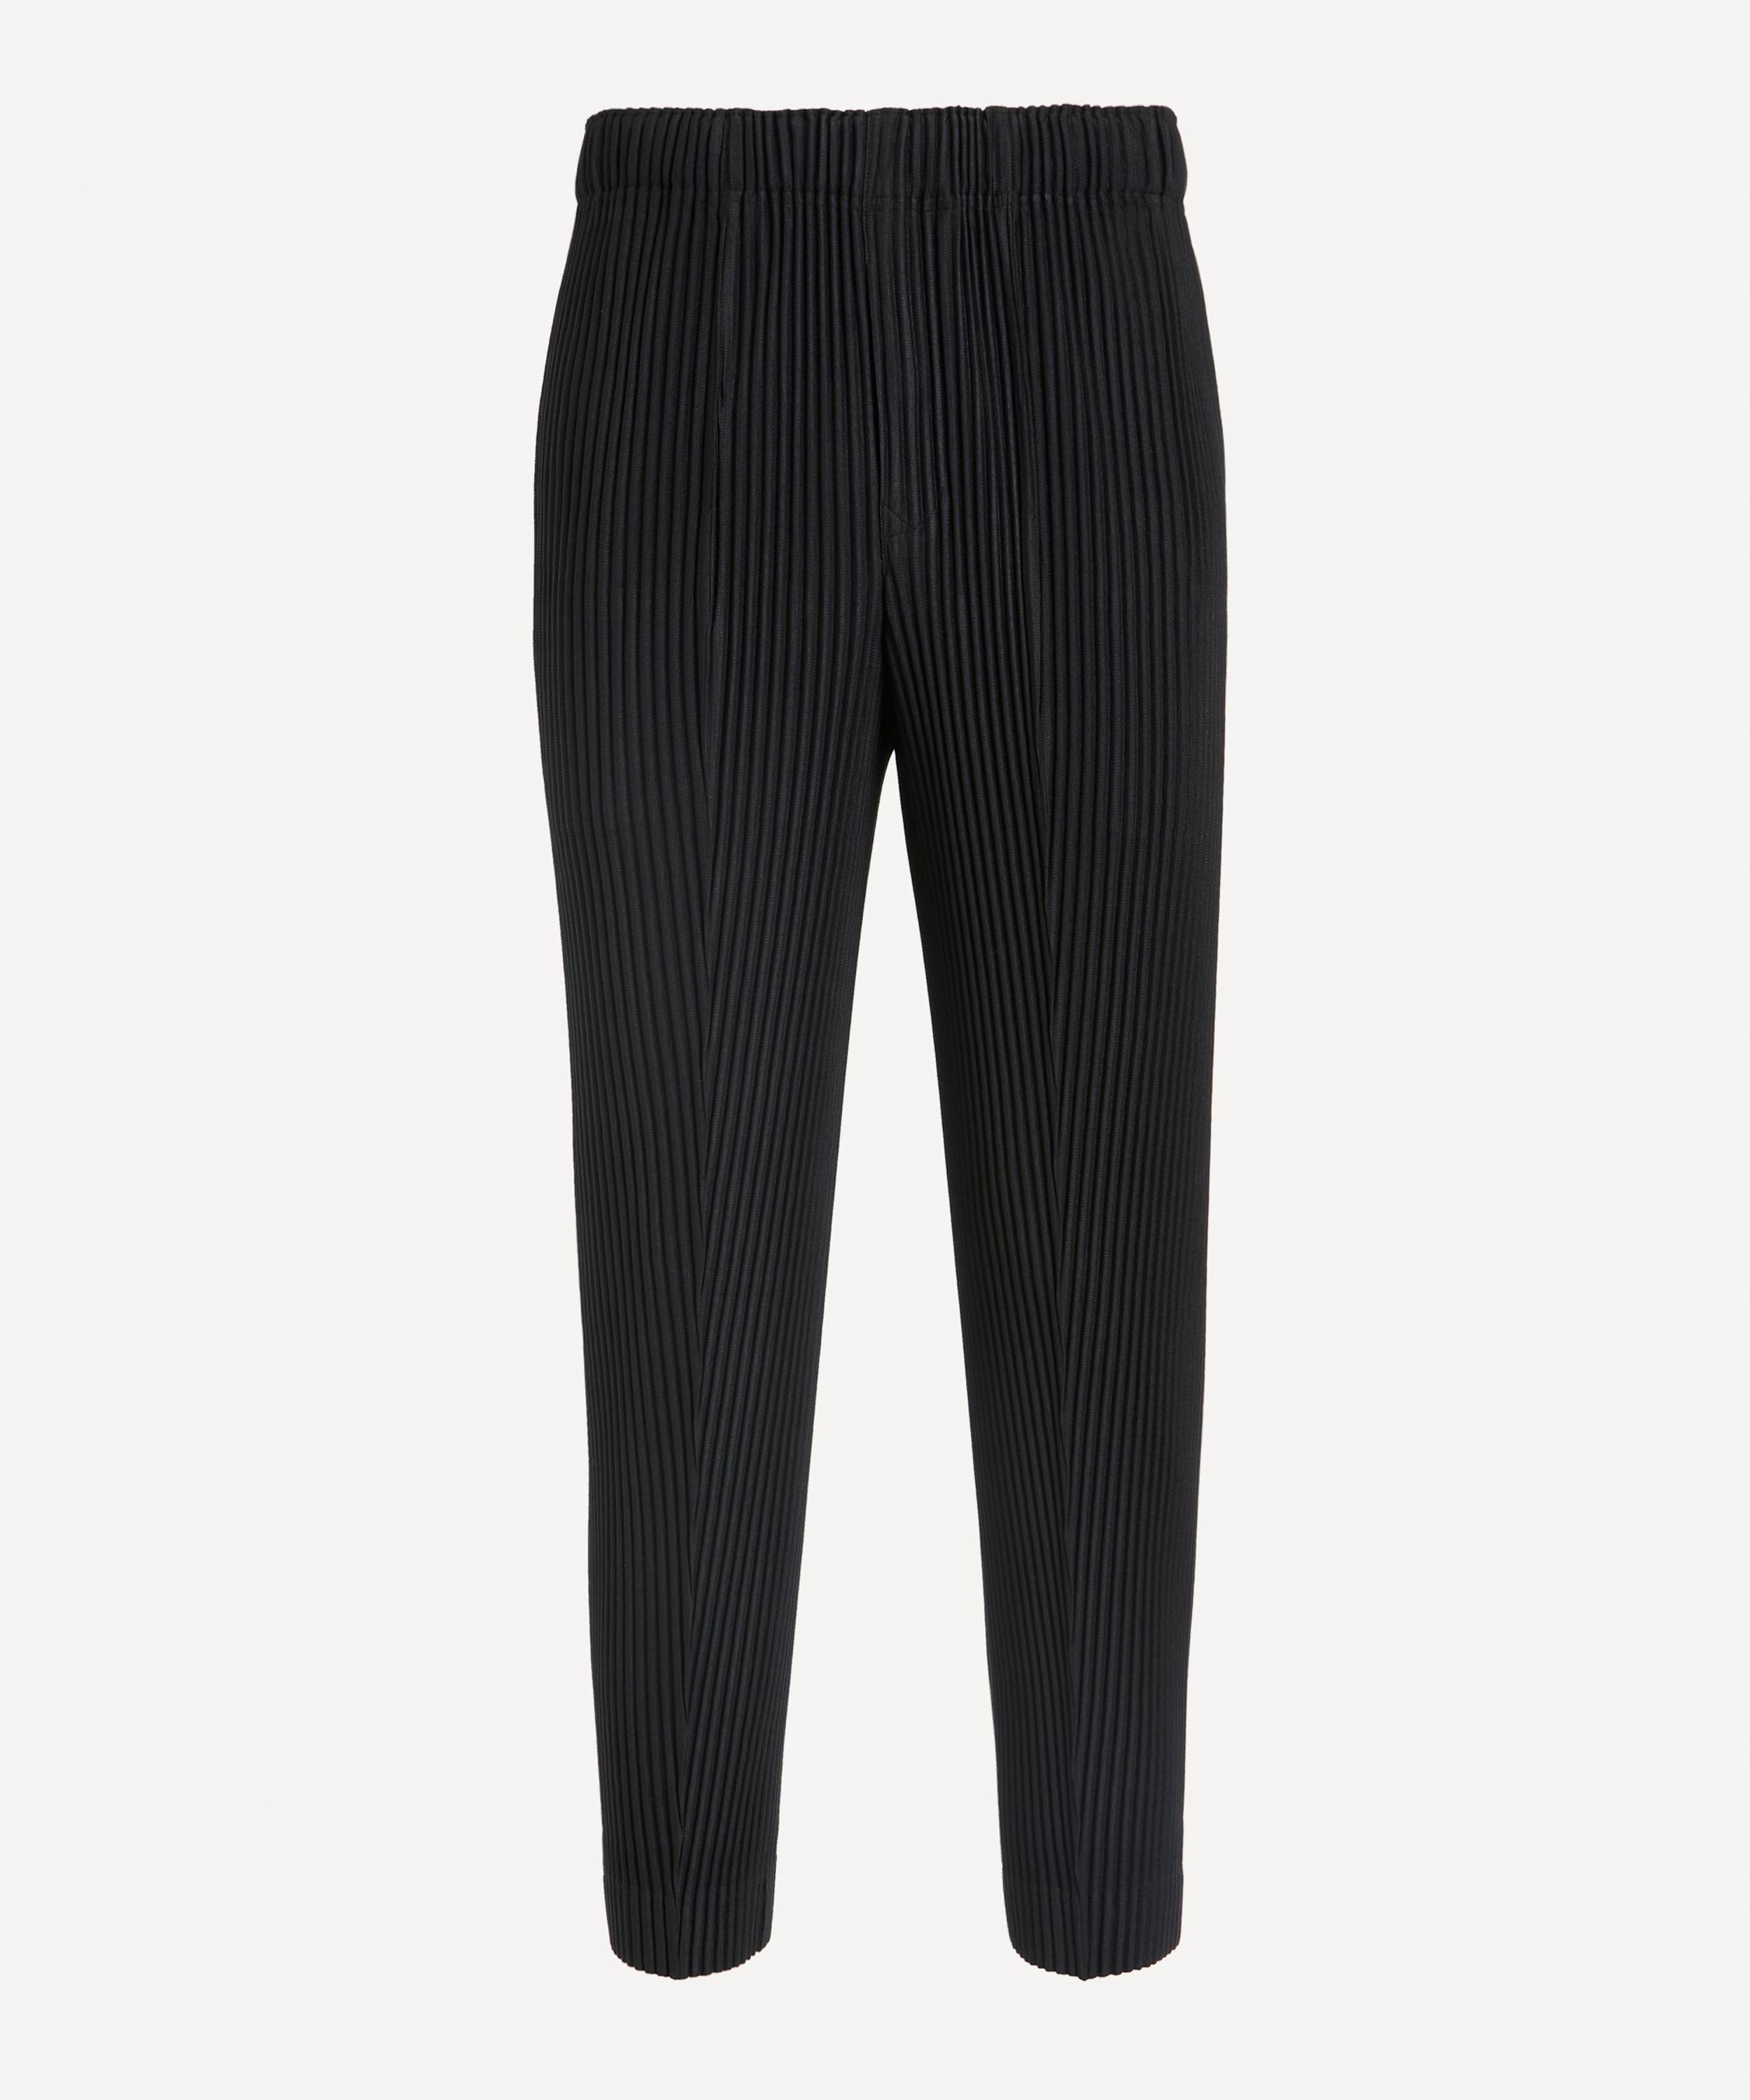 HOMME PLISSÉ ISSEY MIYAKE - Pleated Centre-Crease Trousers